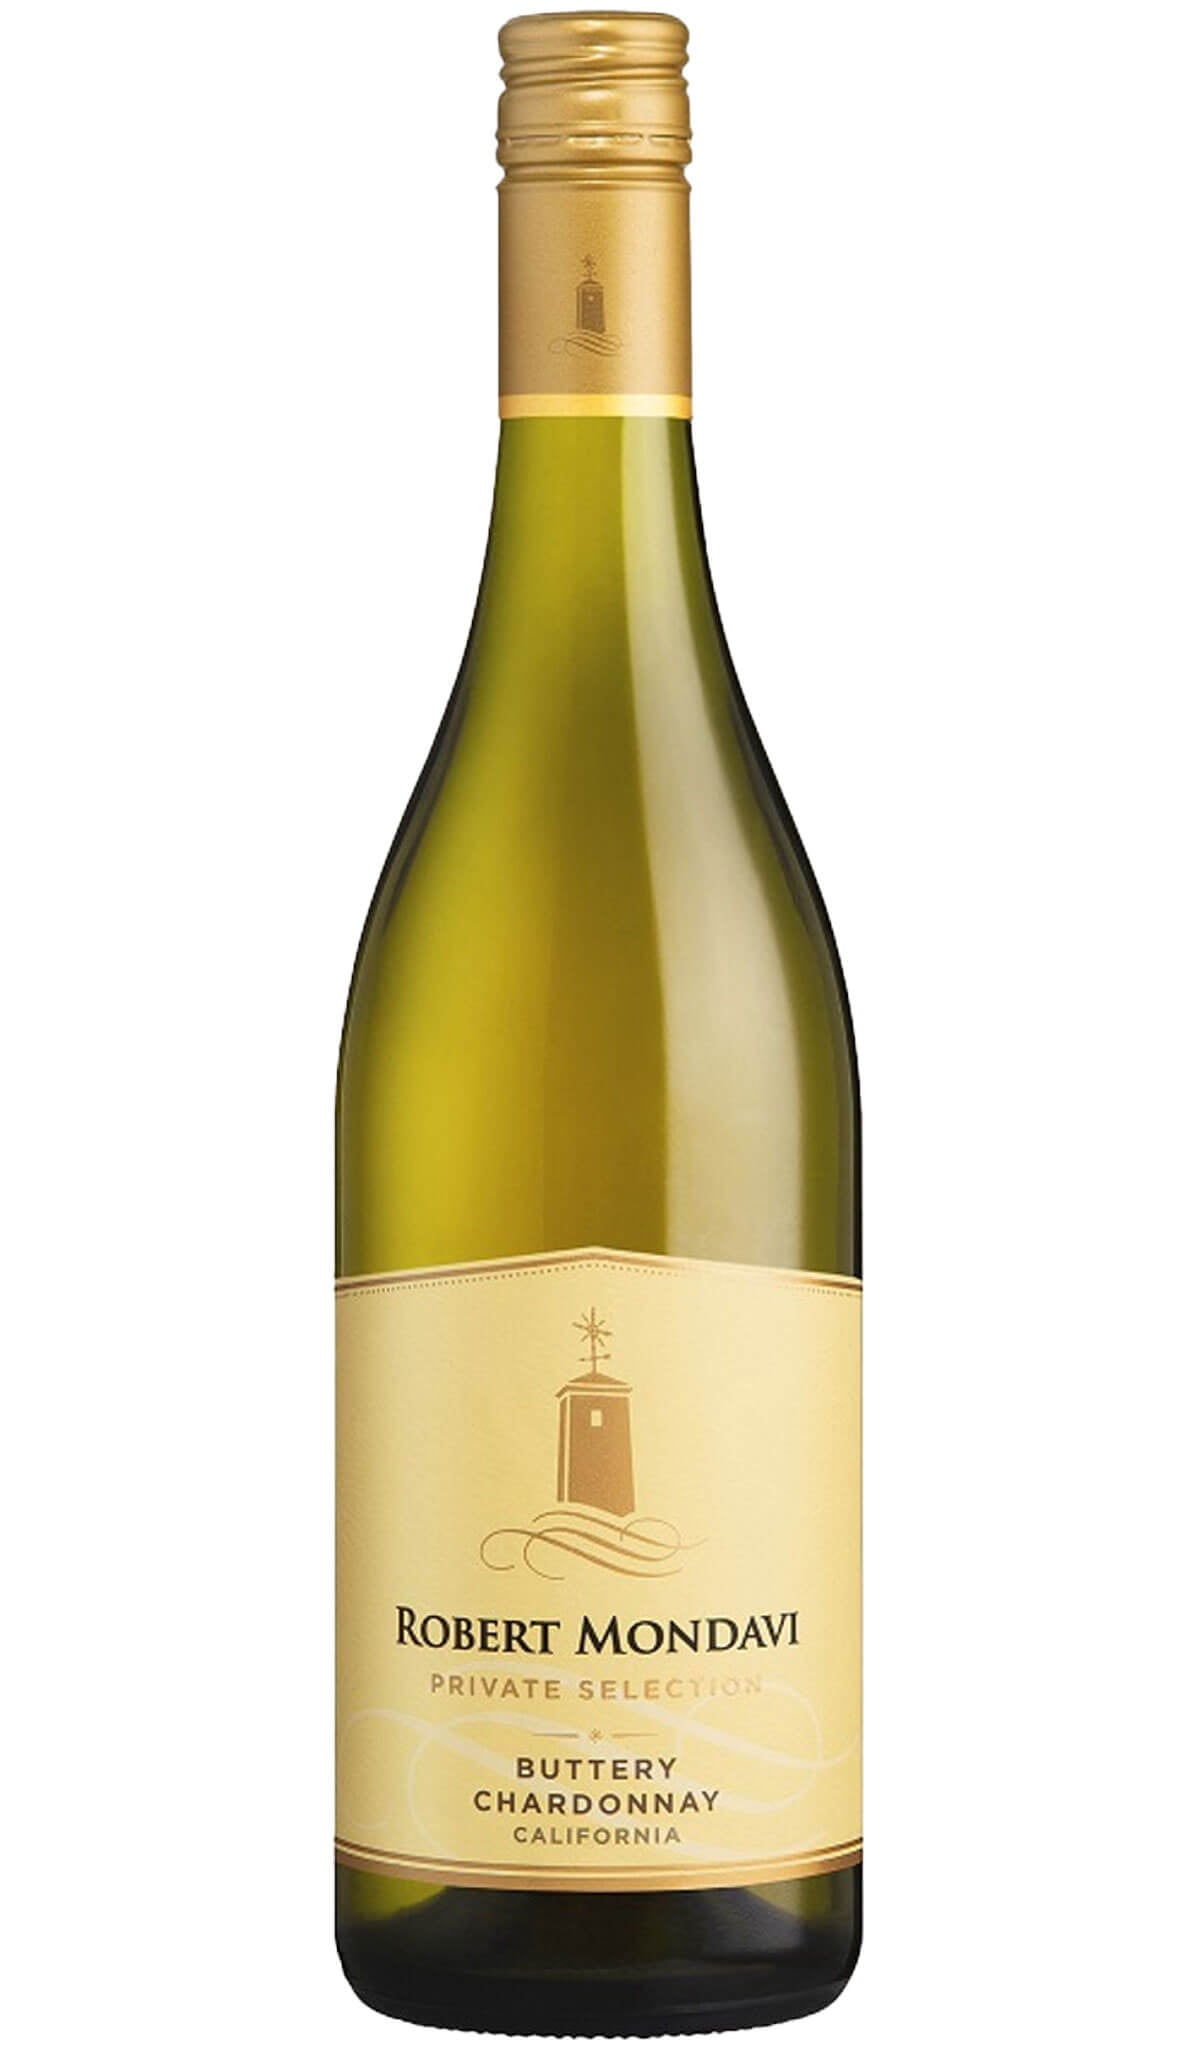 Find out more, explore the range and buy Robert Mondavi Buttery Chardonnay 2022 (California, USA) available online at Wine Sellers Direct - Australia's independent liquor specialists.